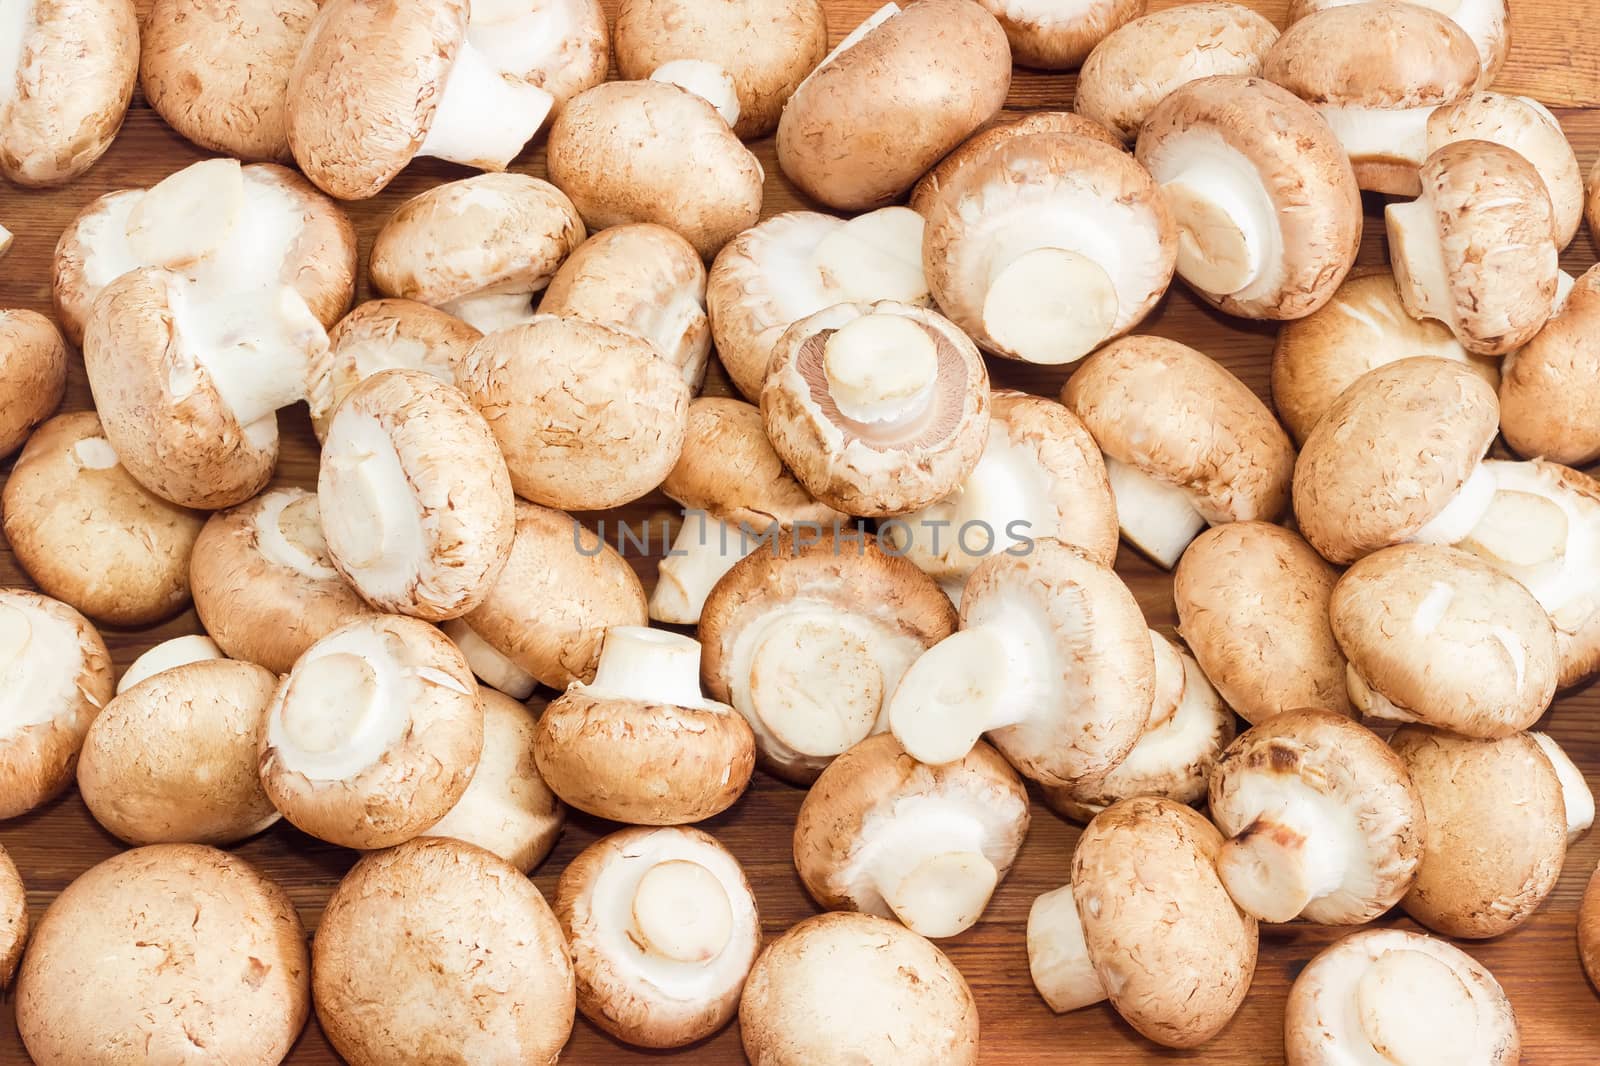 Background of the fresh whole uncooked button mushrooms closeup on a wooden surface
